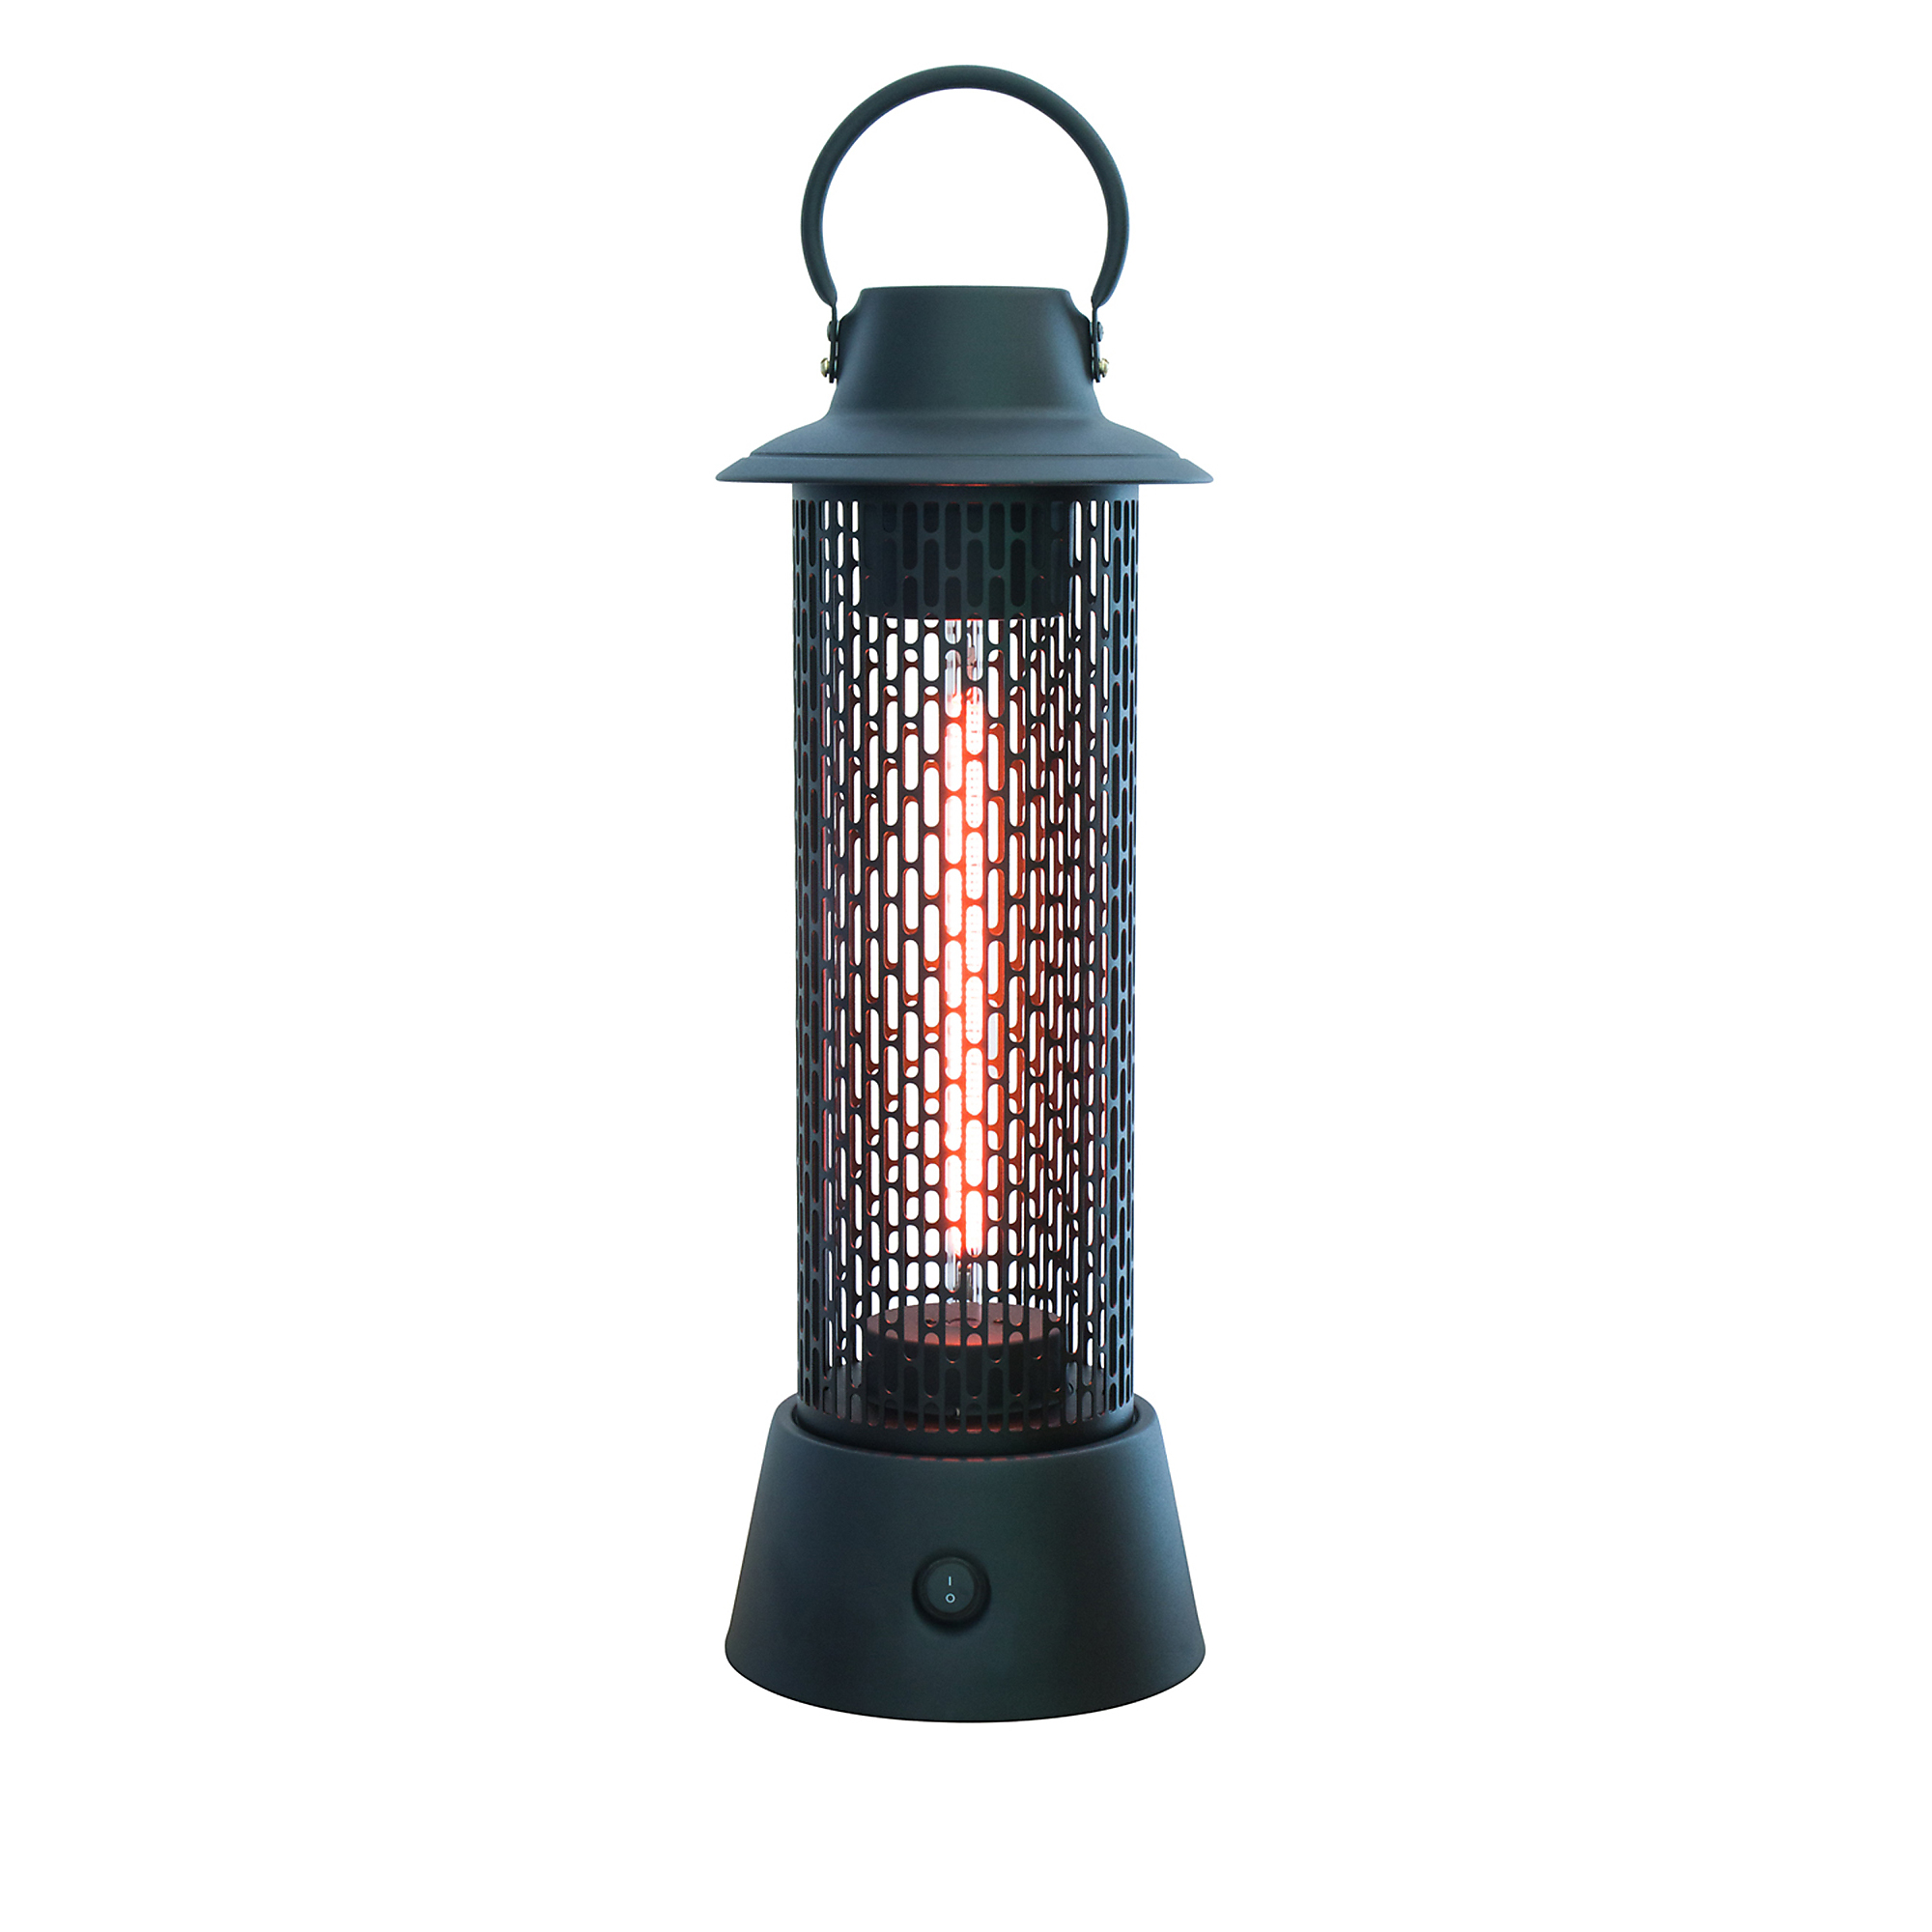 Westinghouse, Portable Patio Heater with lantern styling, Model WES31-1275